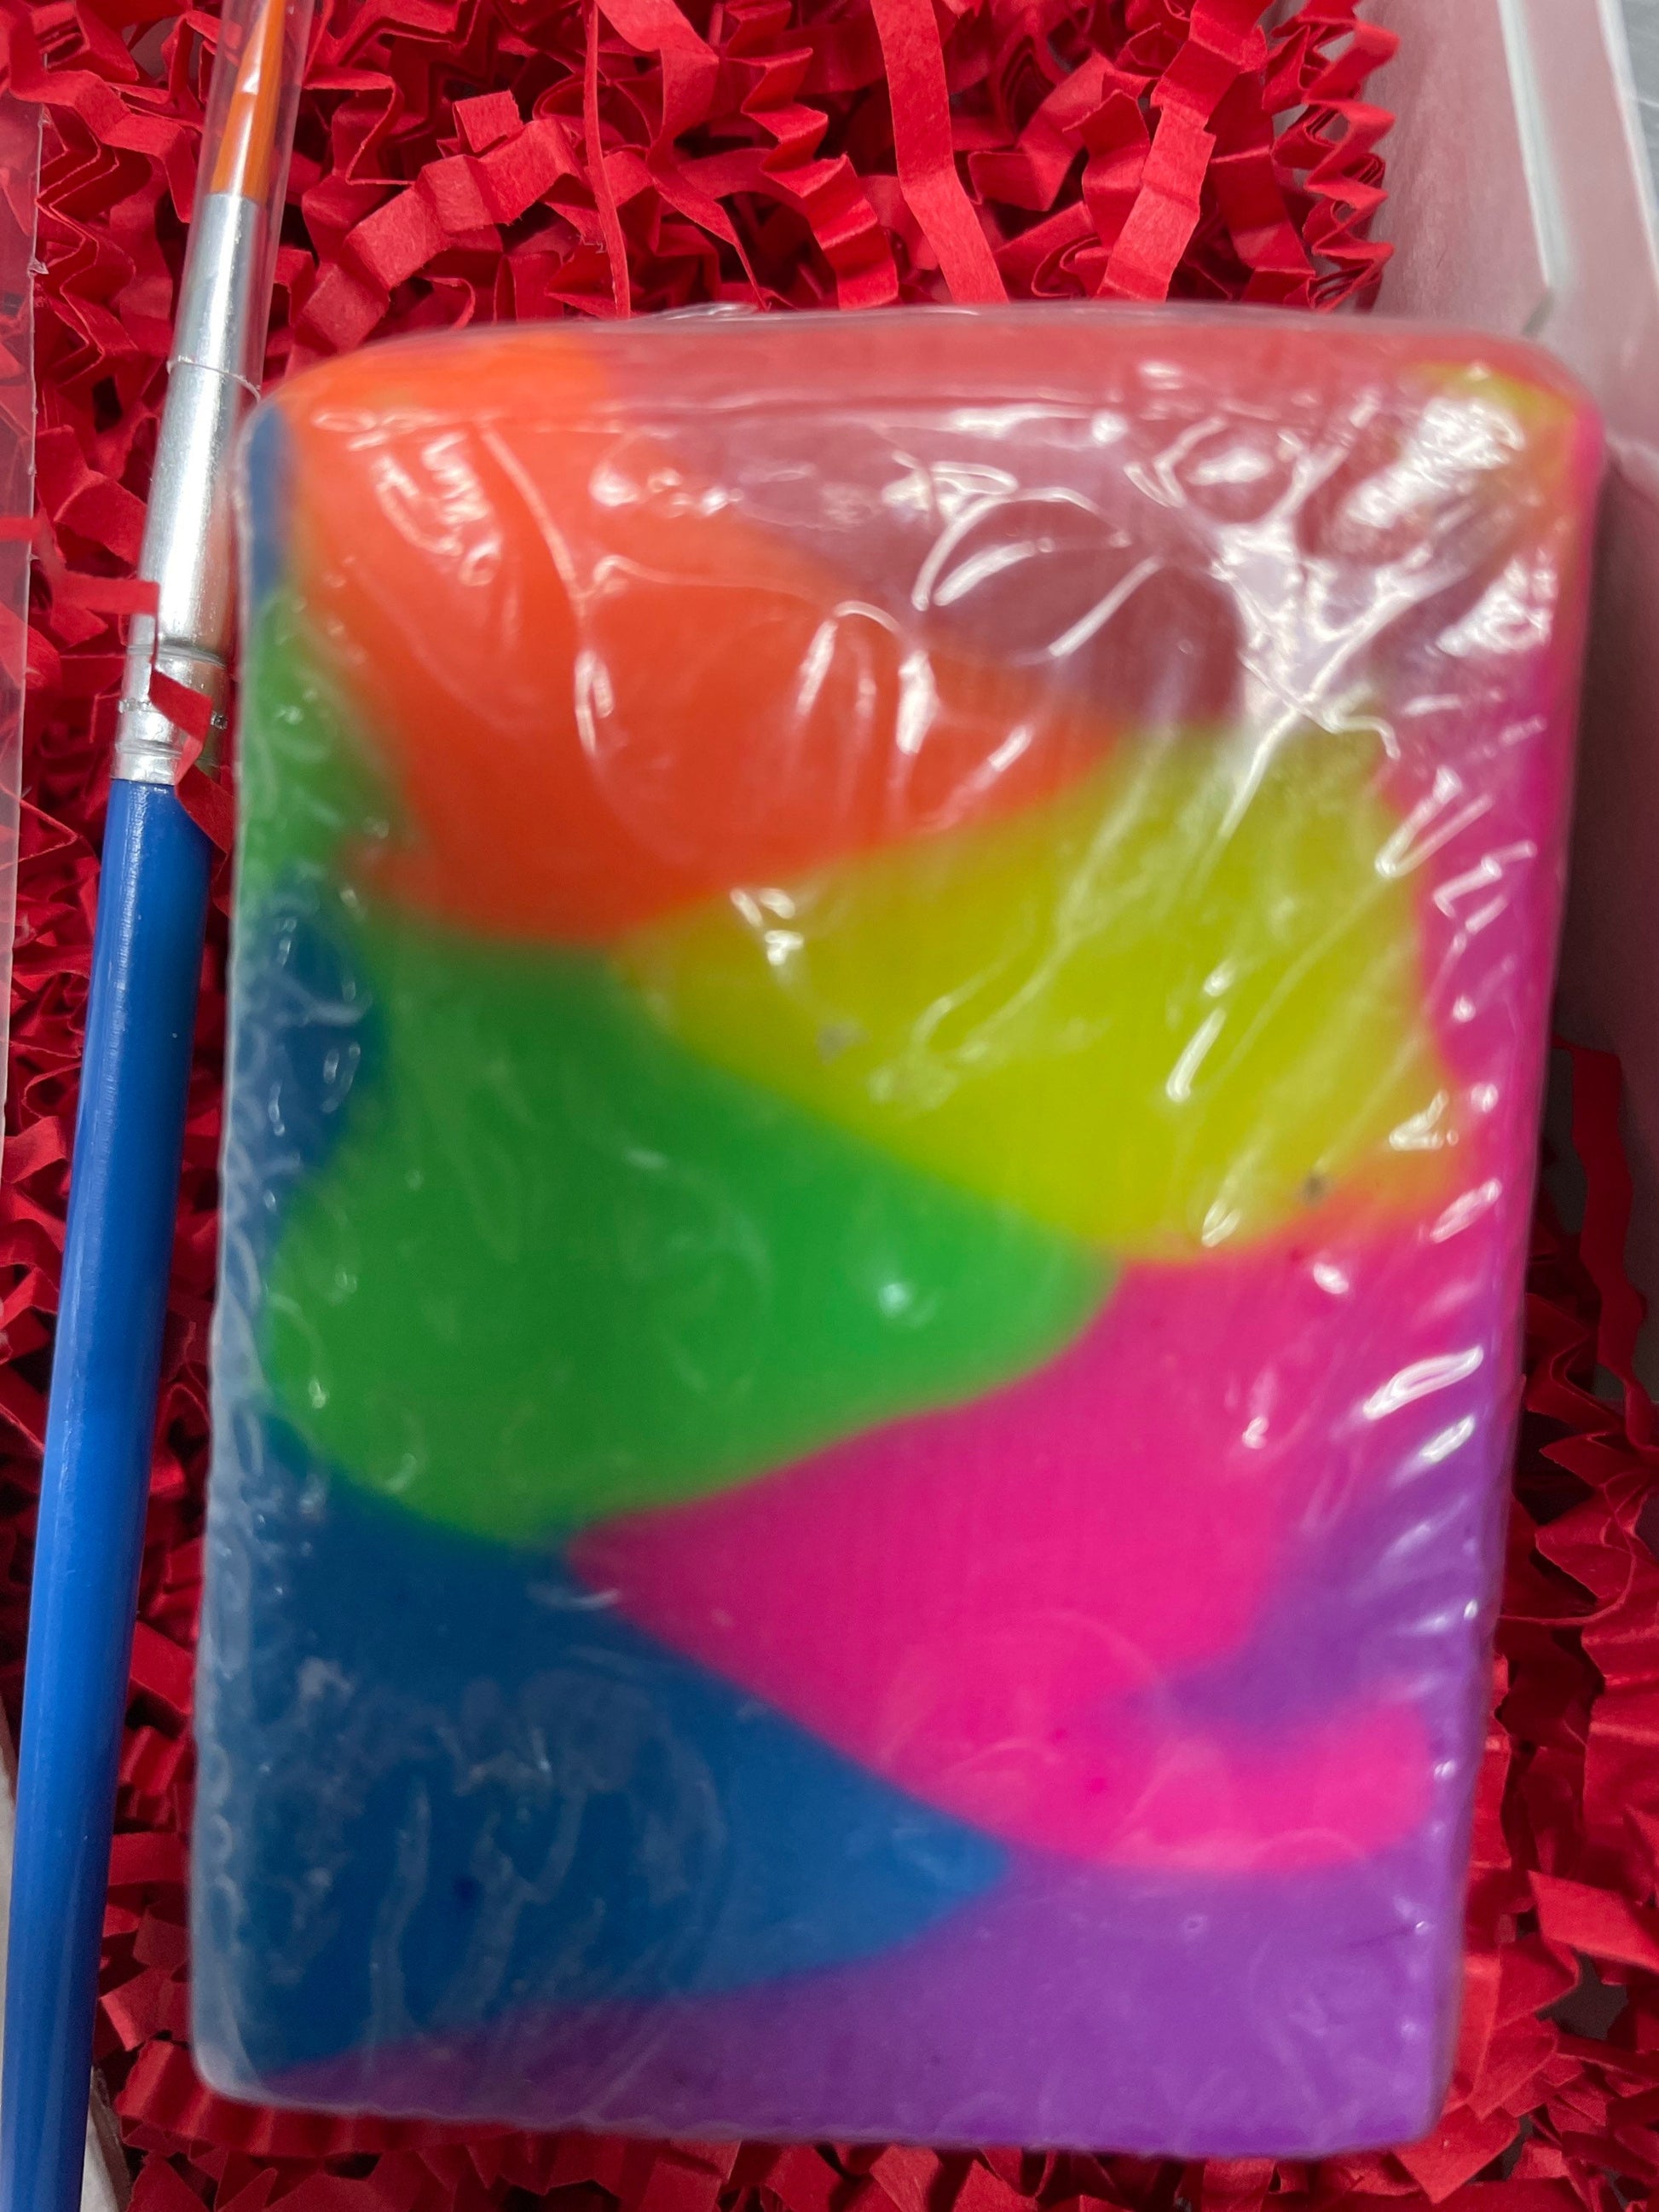 A photo of a rainbow colored soap.